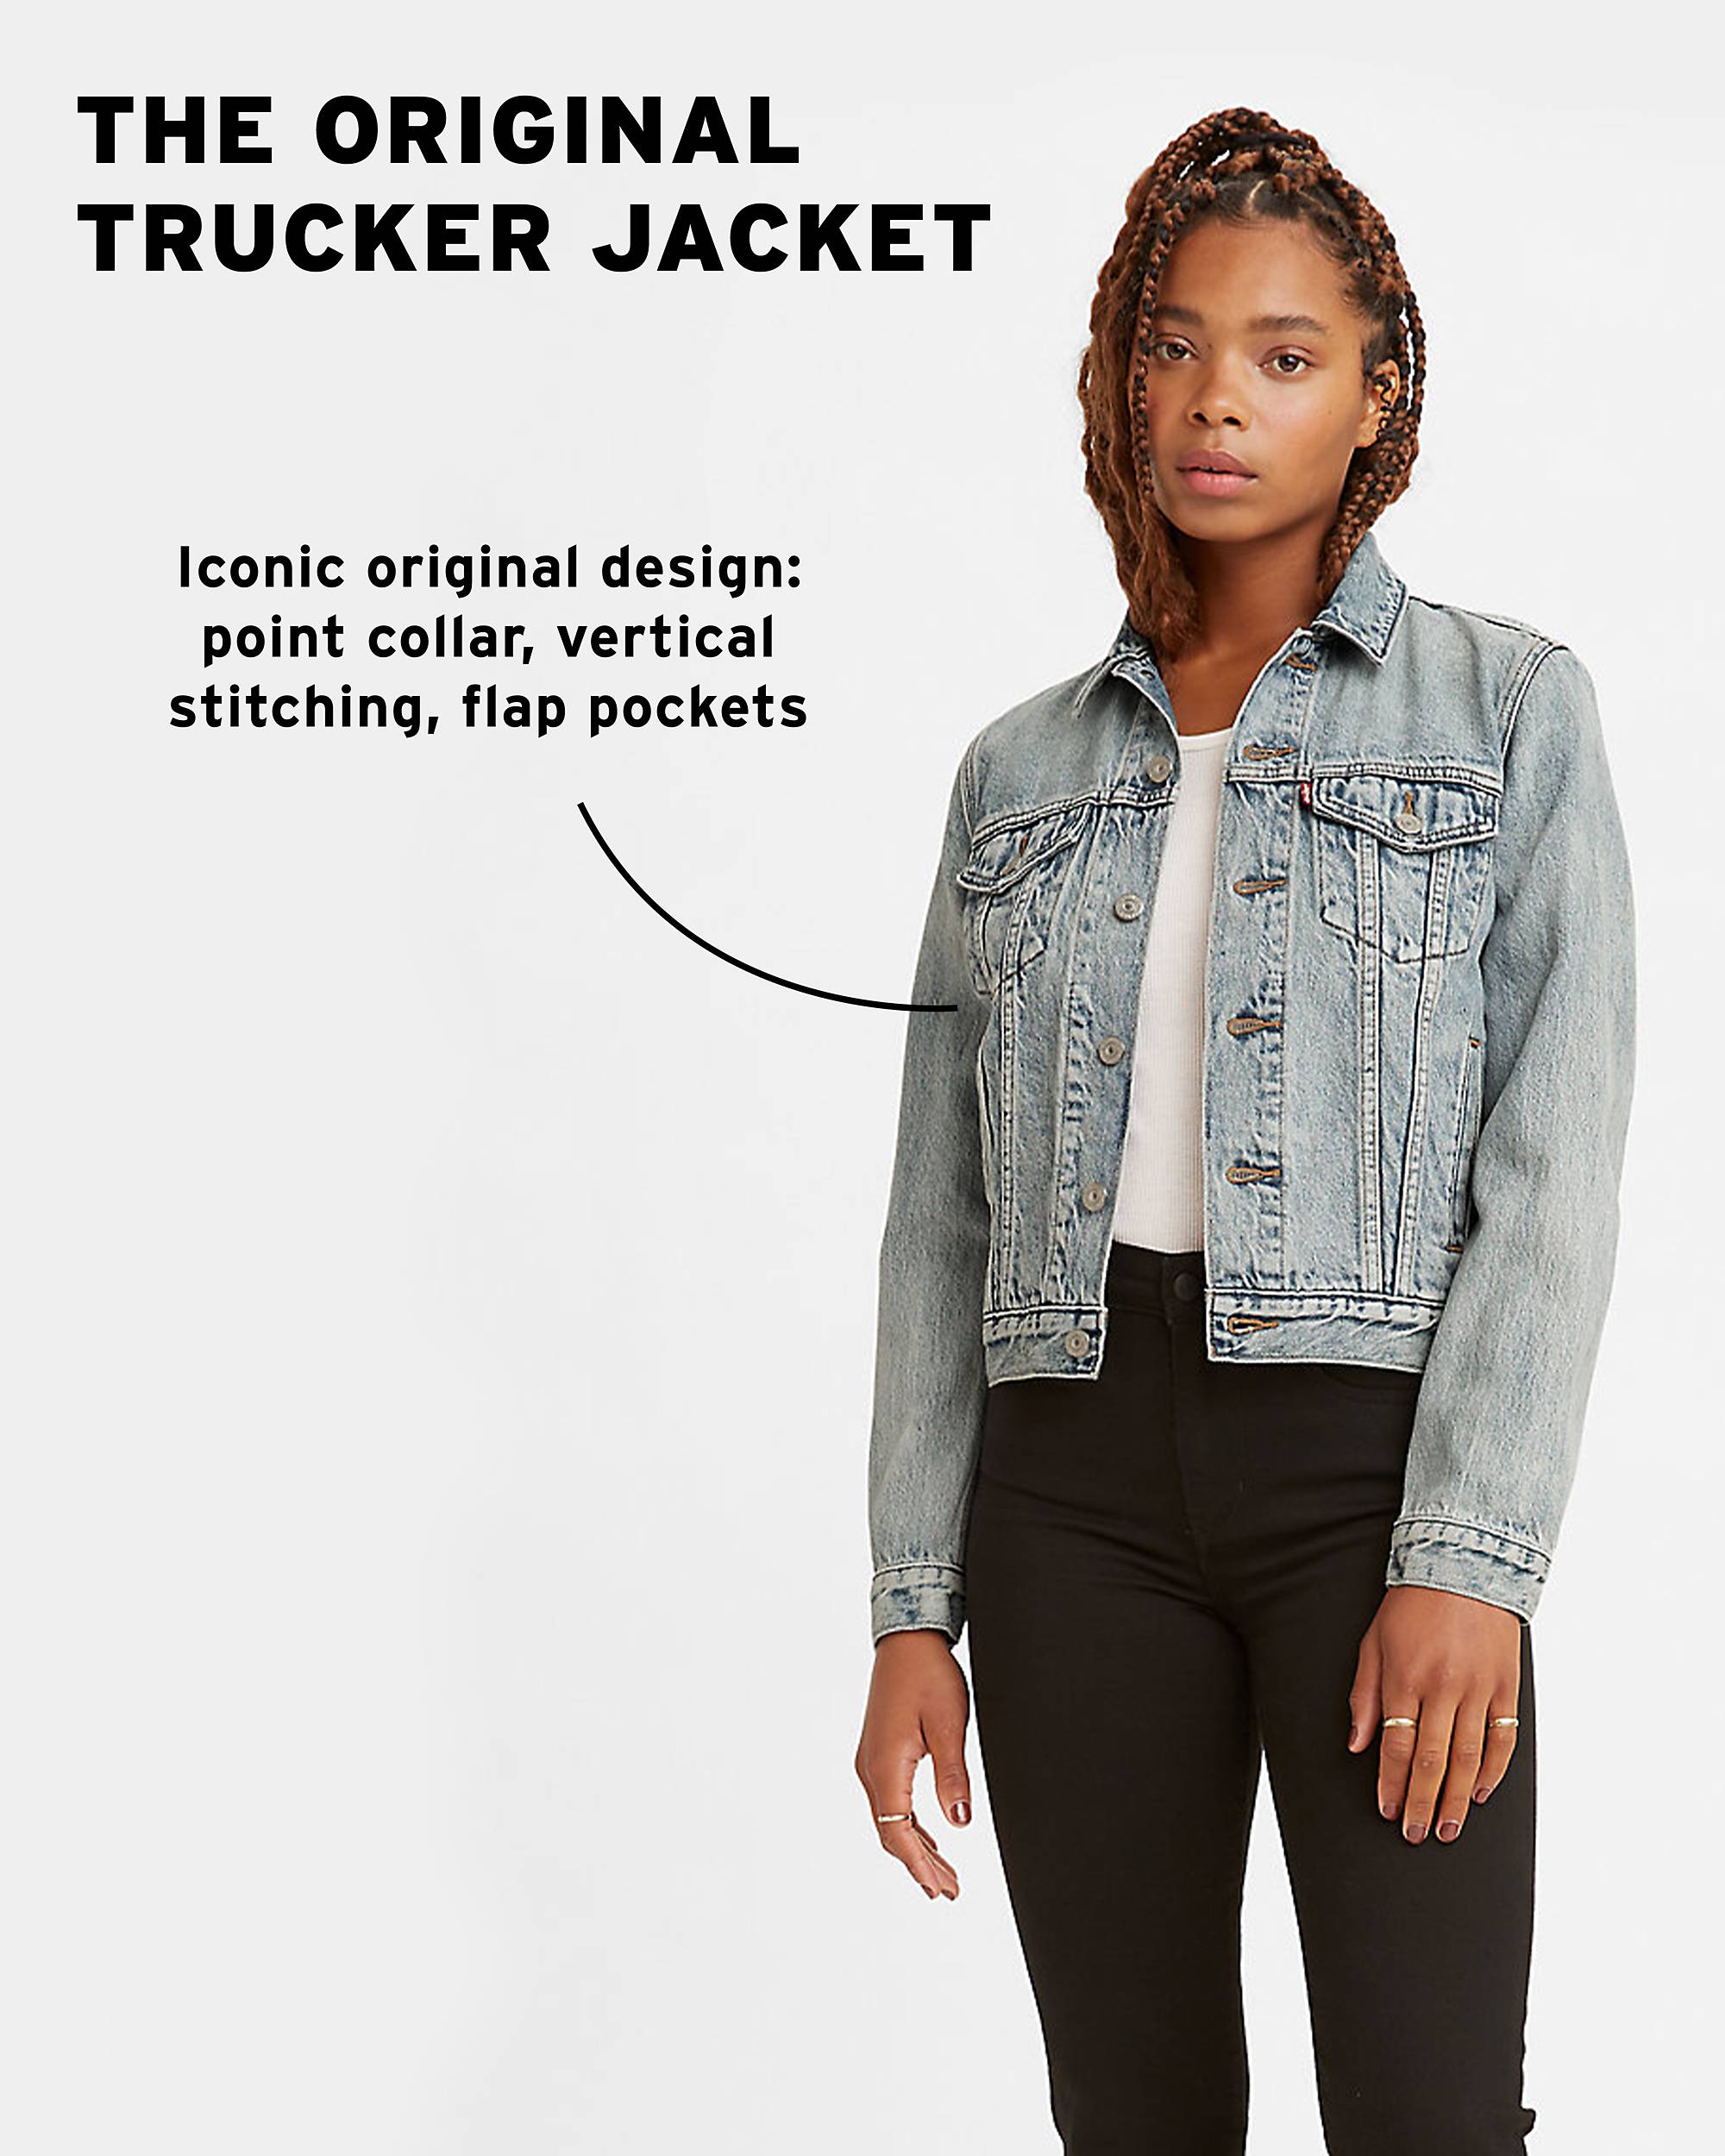 Model wearing Trucker Jacket with copy: "The Original Trucker, iconic original design: point collar, vertical stitching, flap pockets"